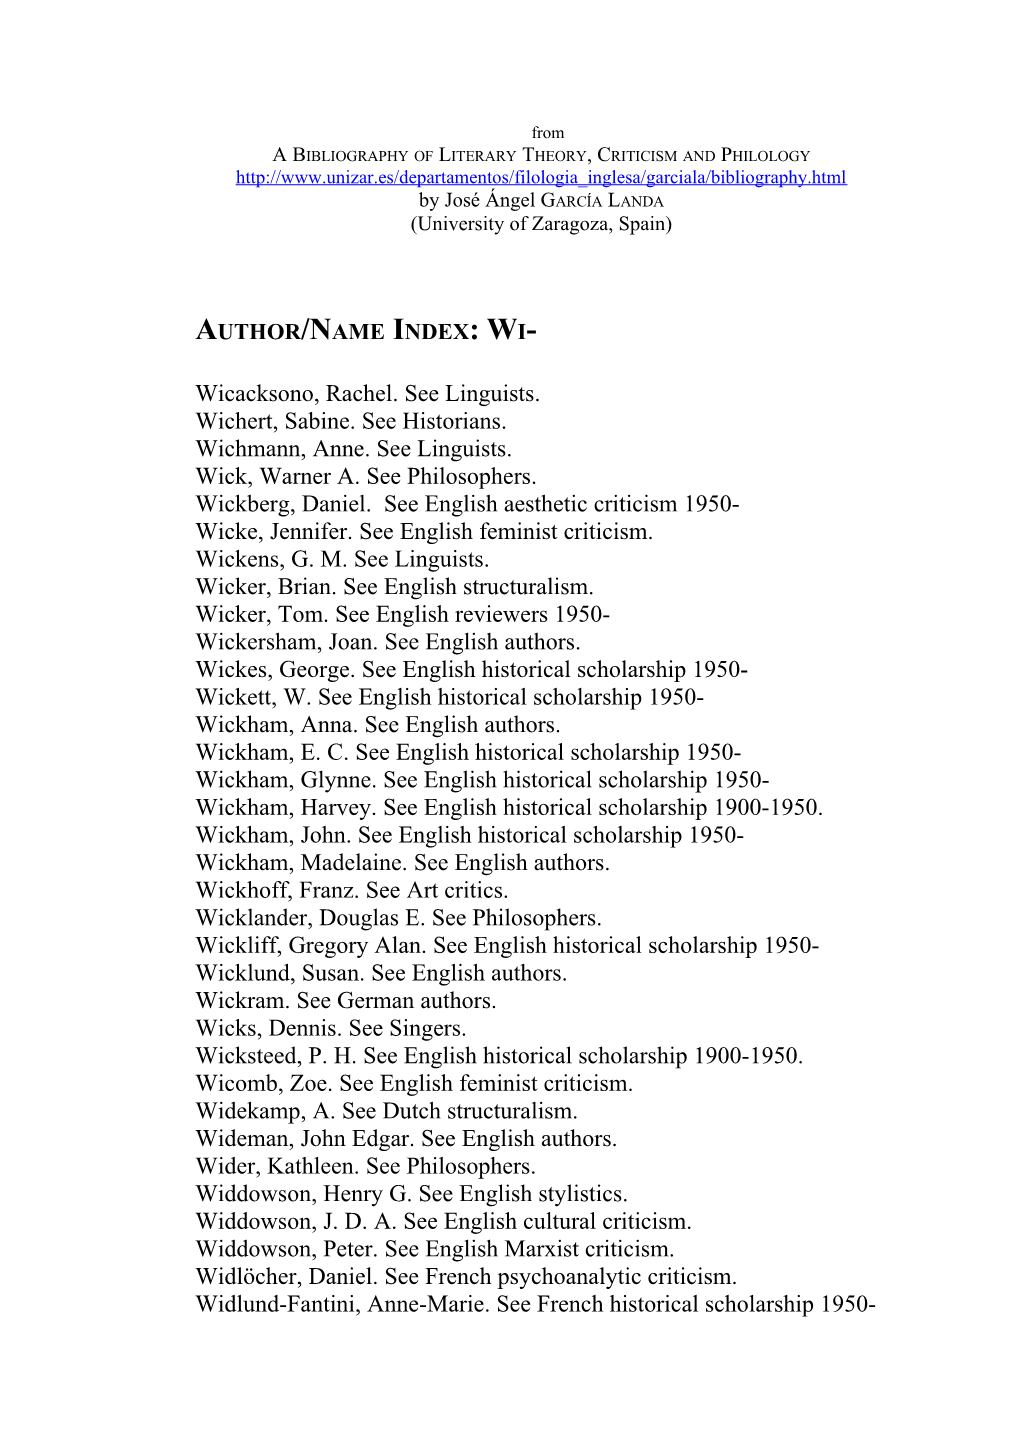 From a Bibliography of Literary Theory, Criticism and Philology s17